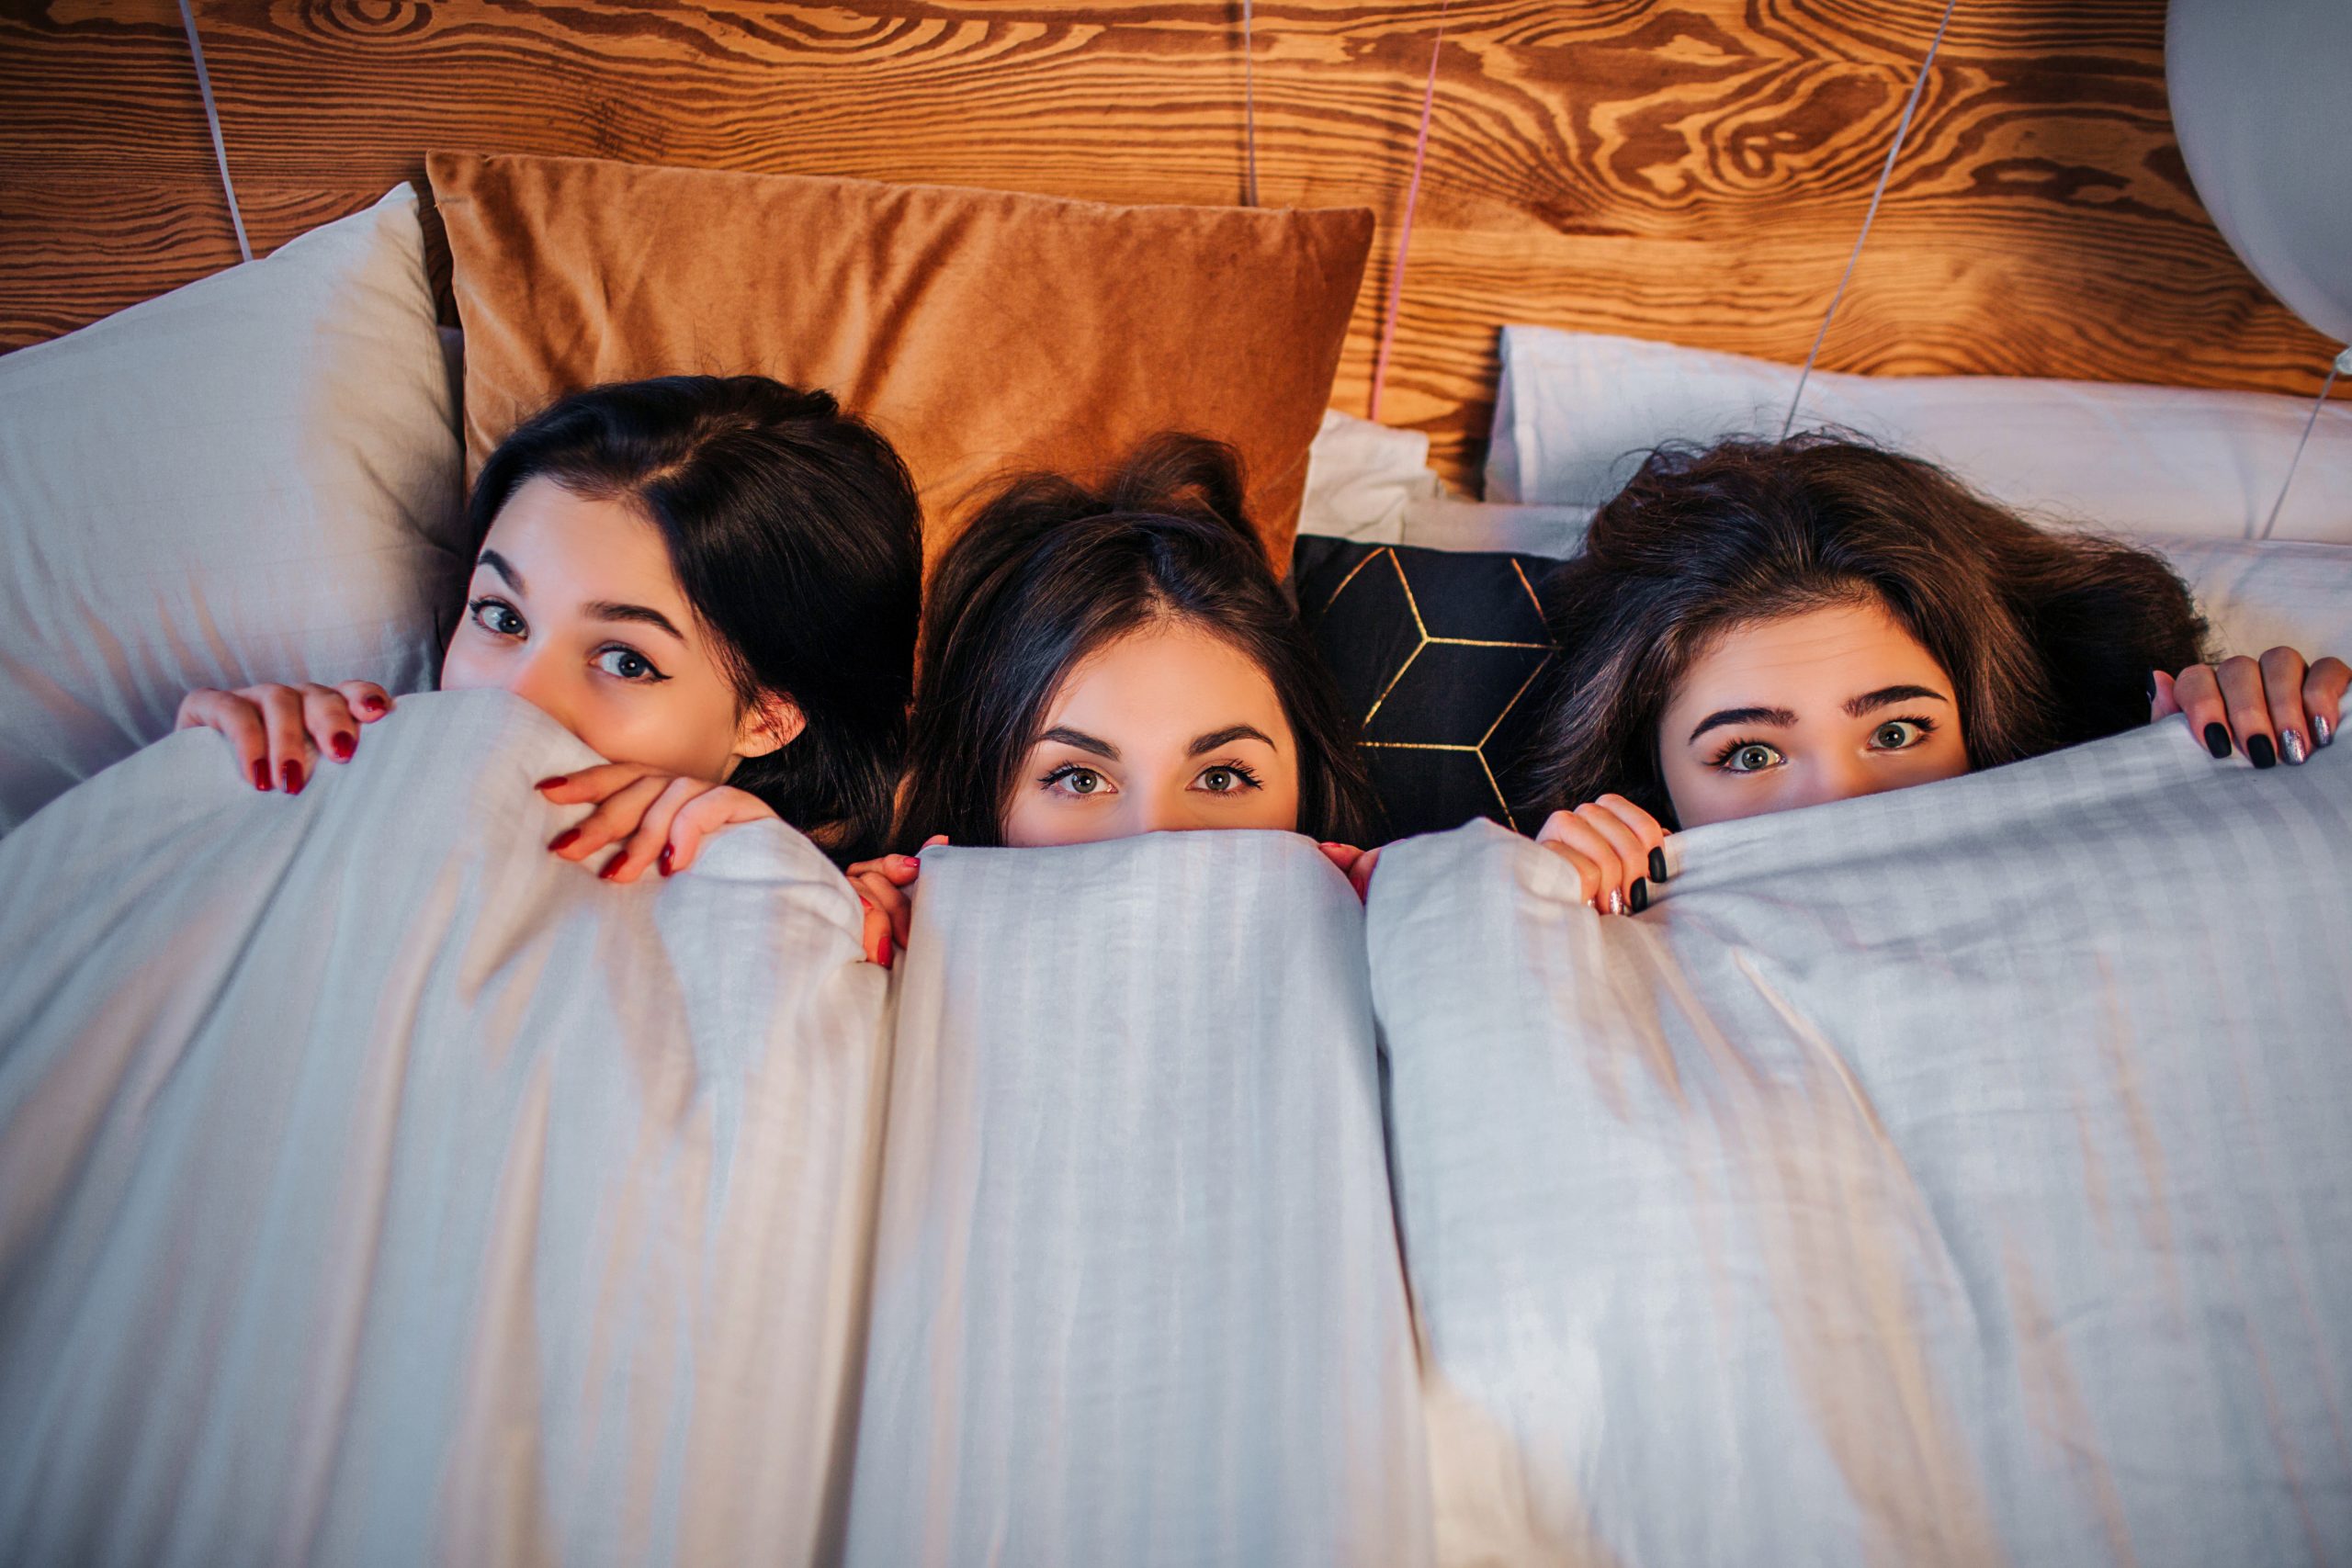 Excited young women covering part of their faces with white blanket